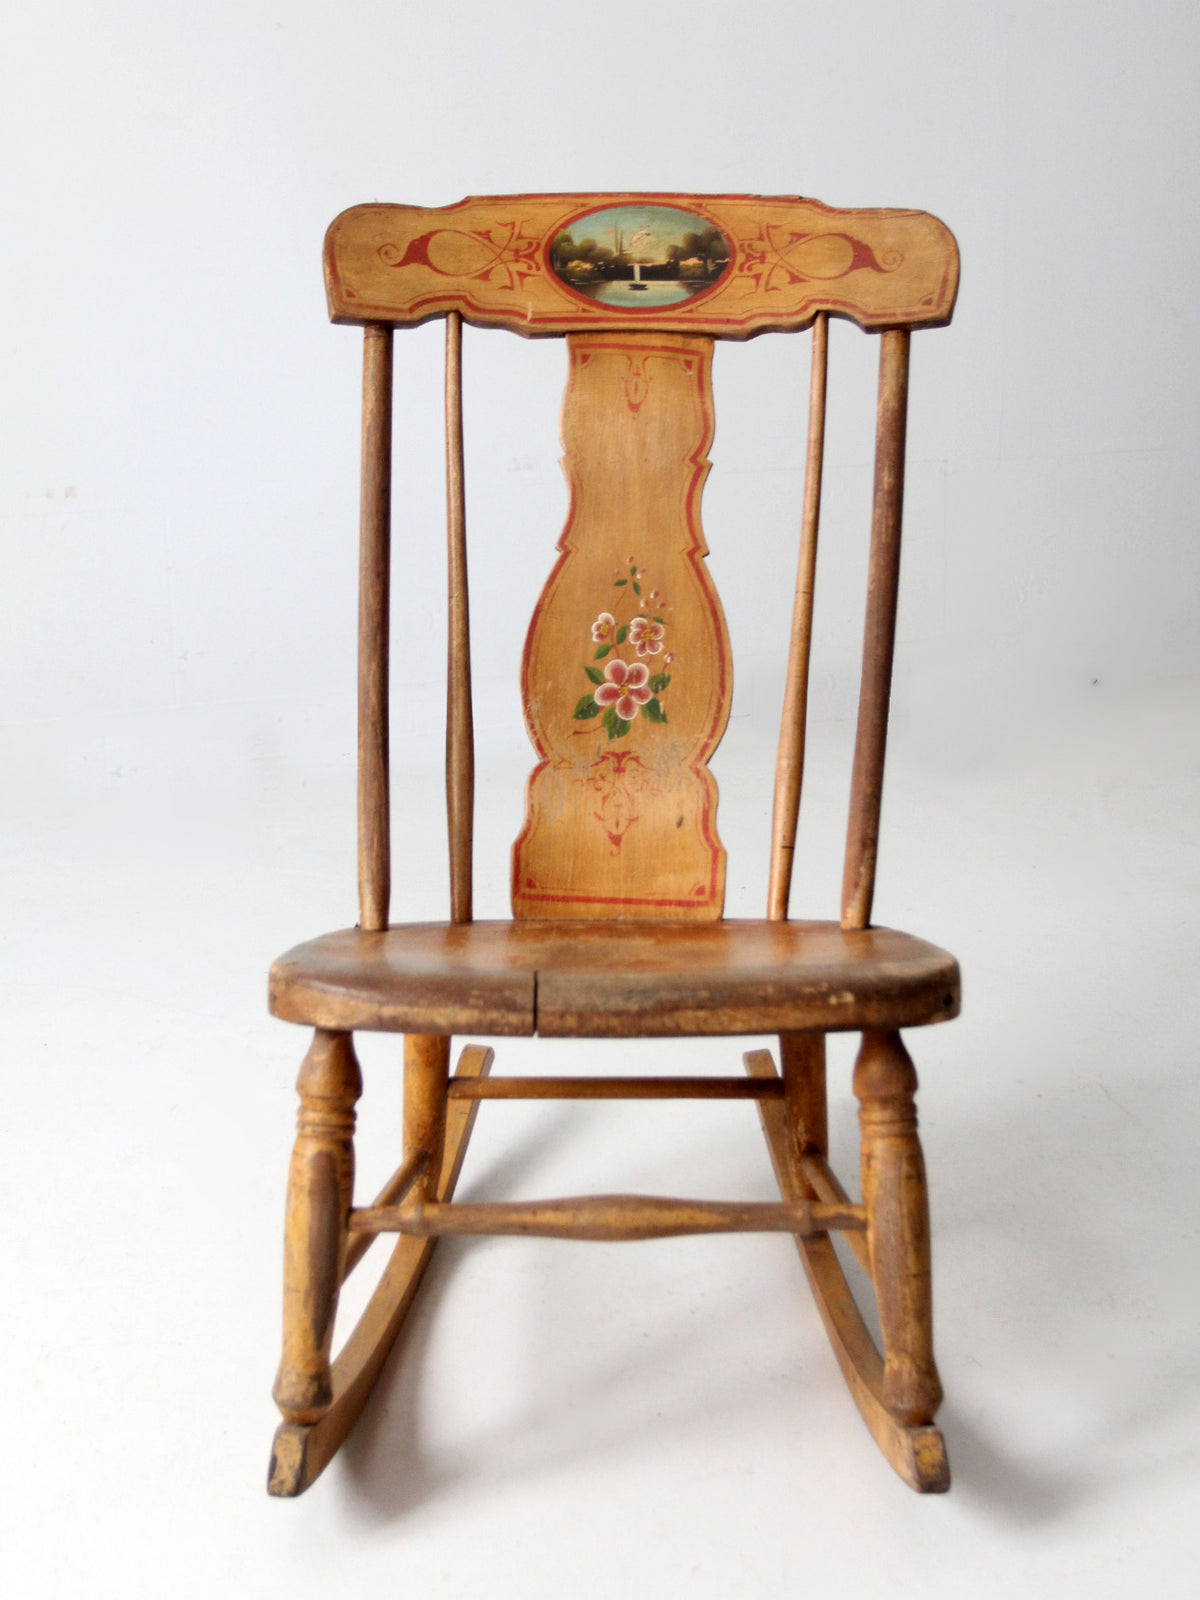 antique painted rocking chair